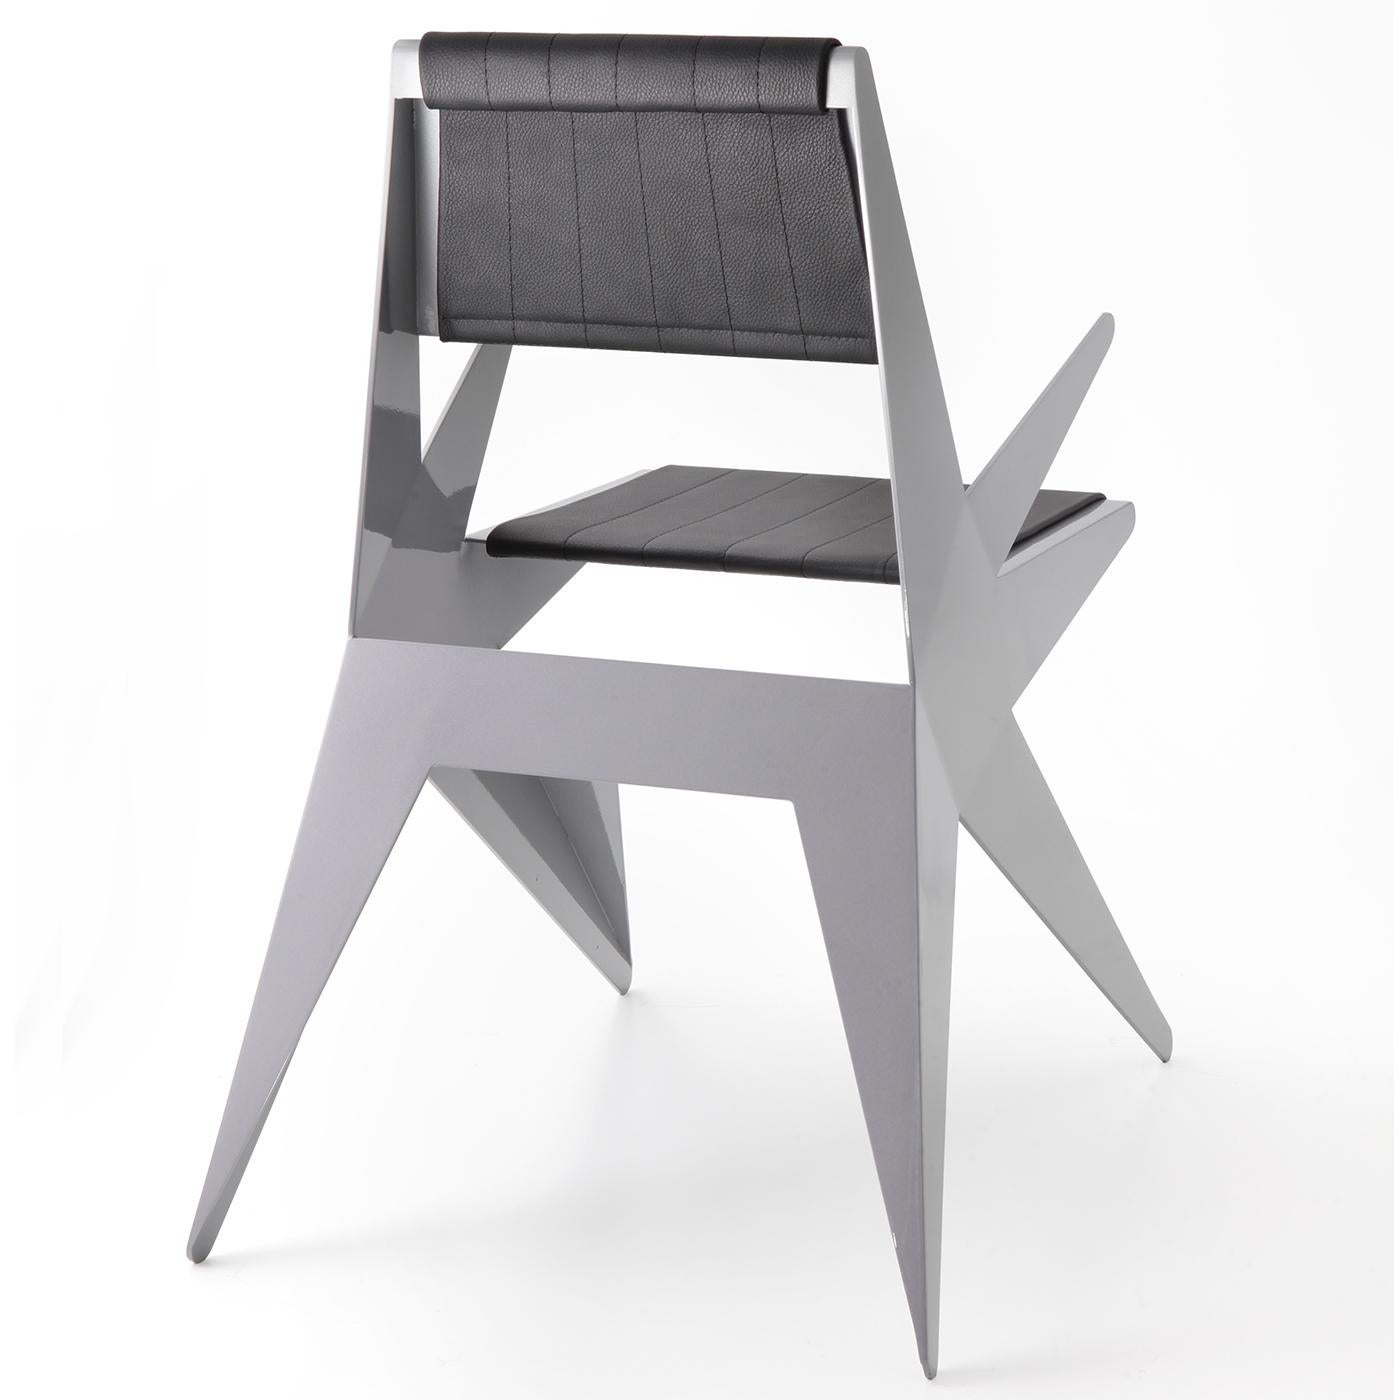 This unique chair with armrests is a design by Arch. Antonio Pio Saracino, inspired by the angular shape of a star. It is crafted by hand using an ultralight sheet of aluminum, artfully folded, welded, and finished by hand in lacquered black. The